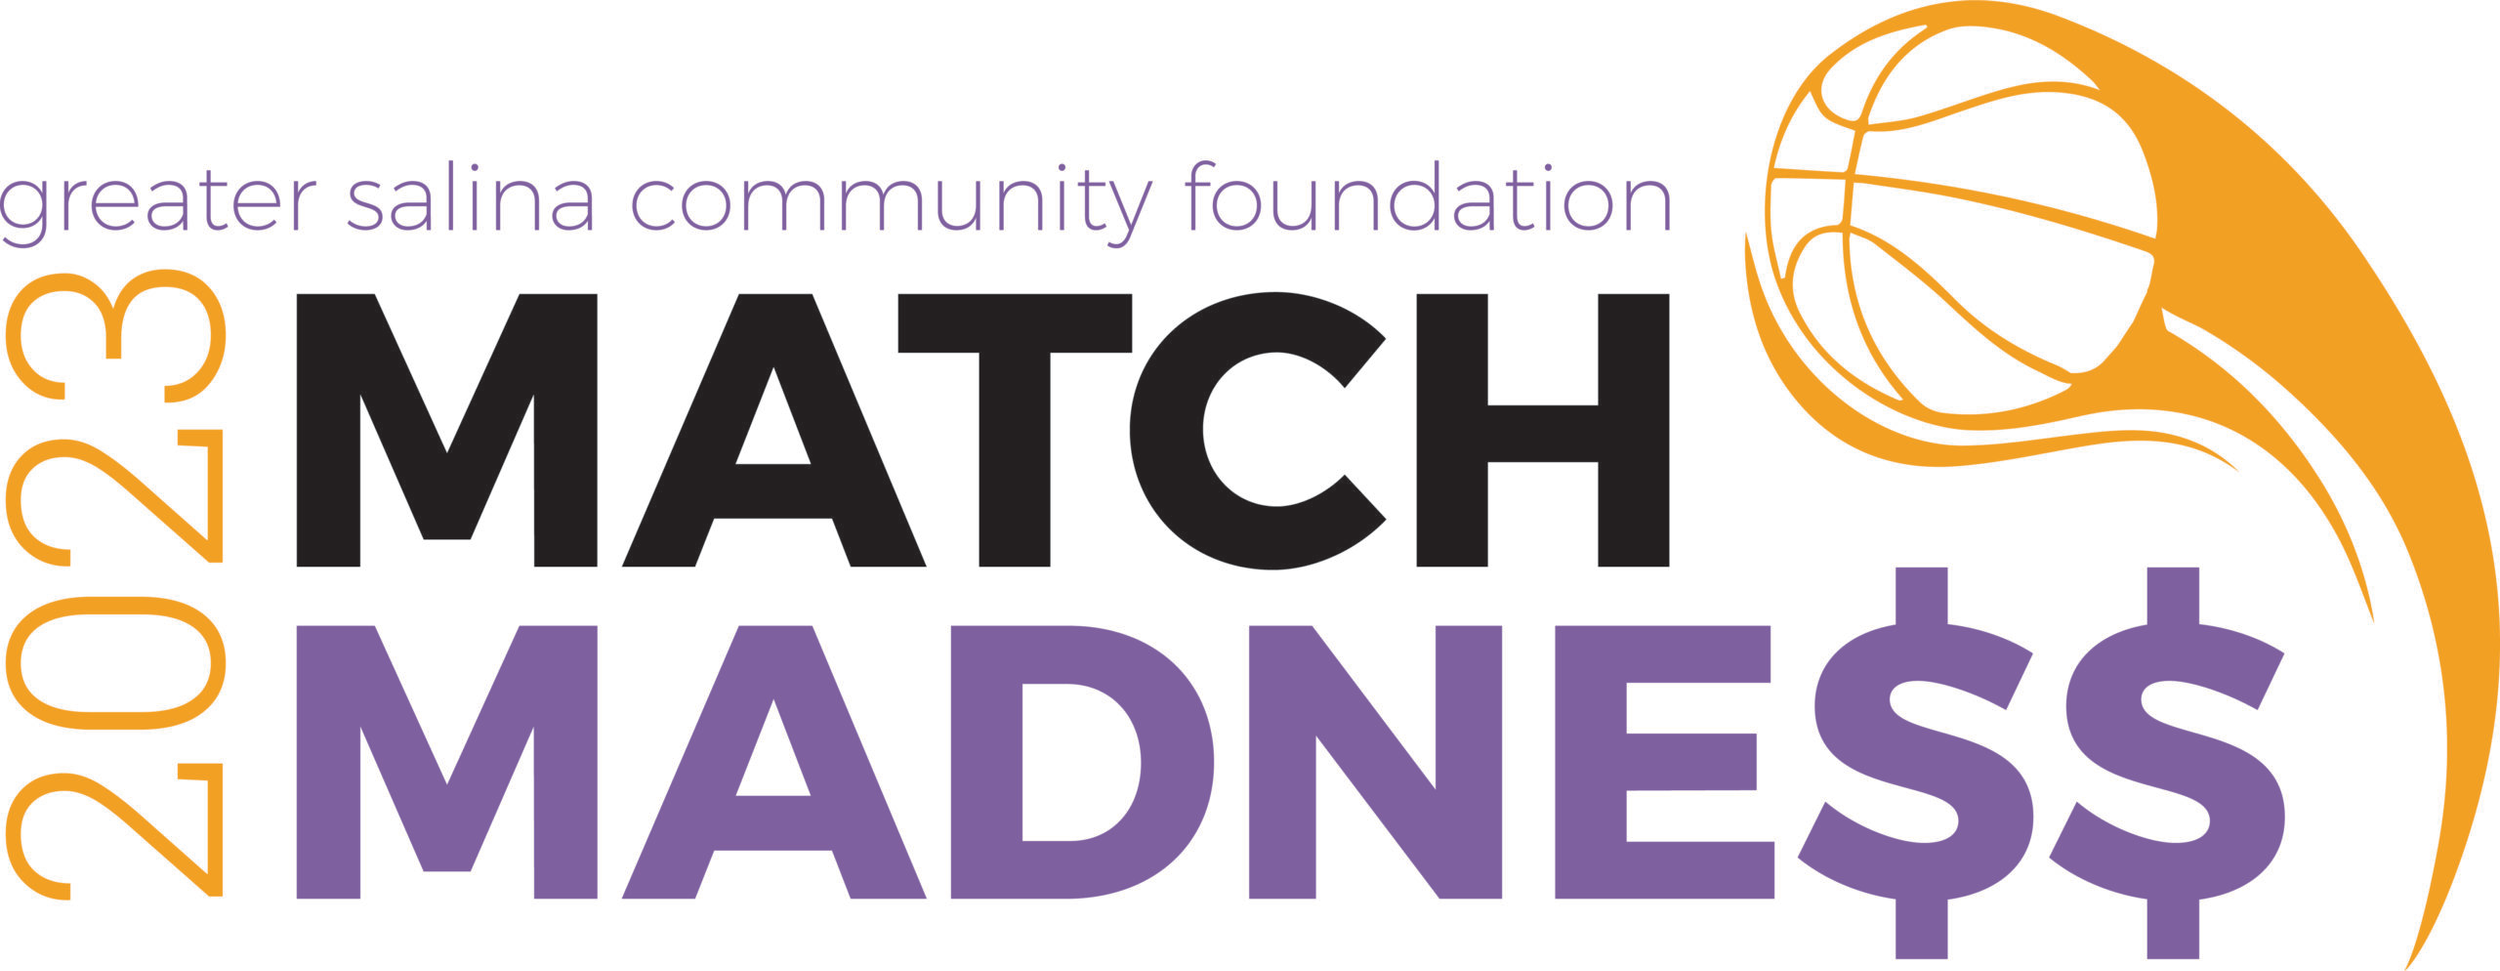 A logo for the Greater Salina Community Foundation's 2023 Match Madness event. The text "2023 Match Madness" is displayed with the word "Madness" in purple and a dollar sign replacing the letter 'S'. An orange basketball graphic is included in the design.